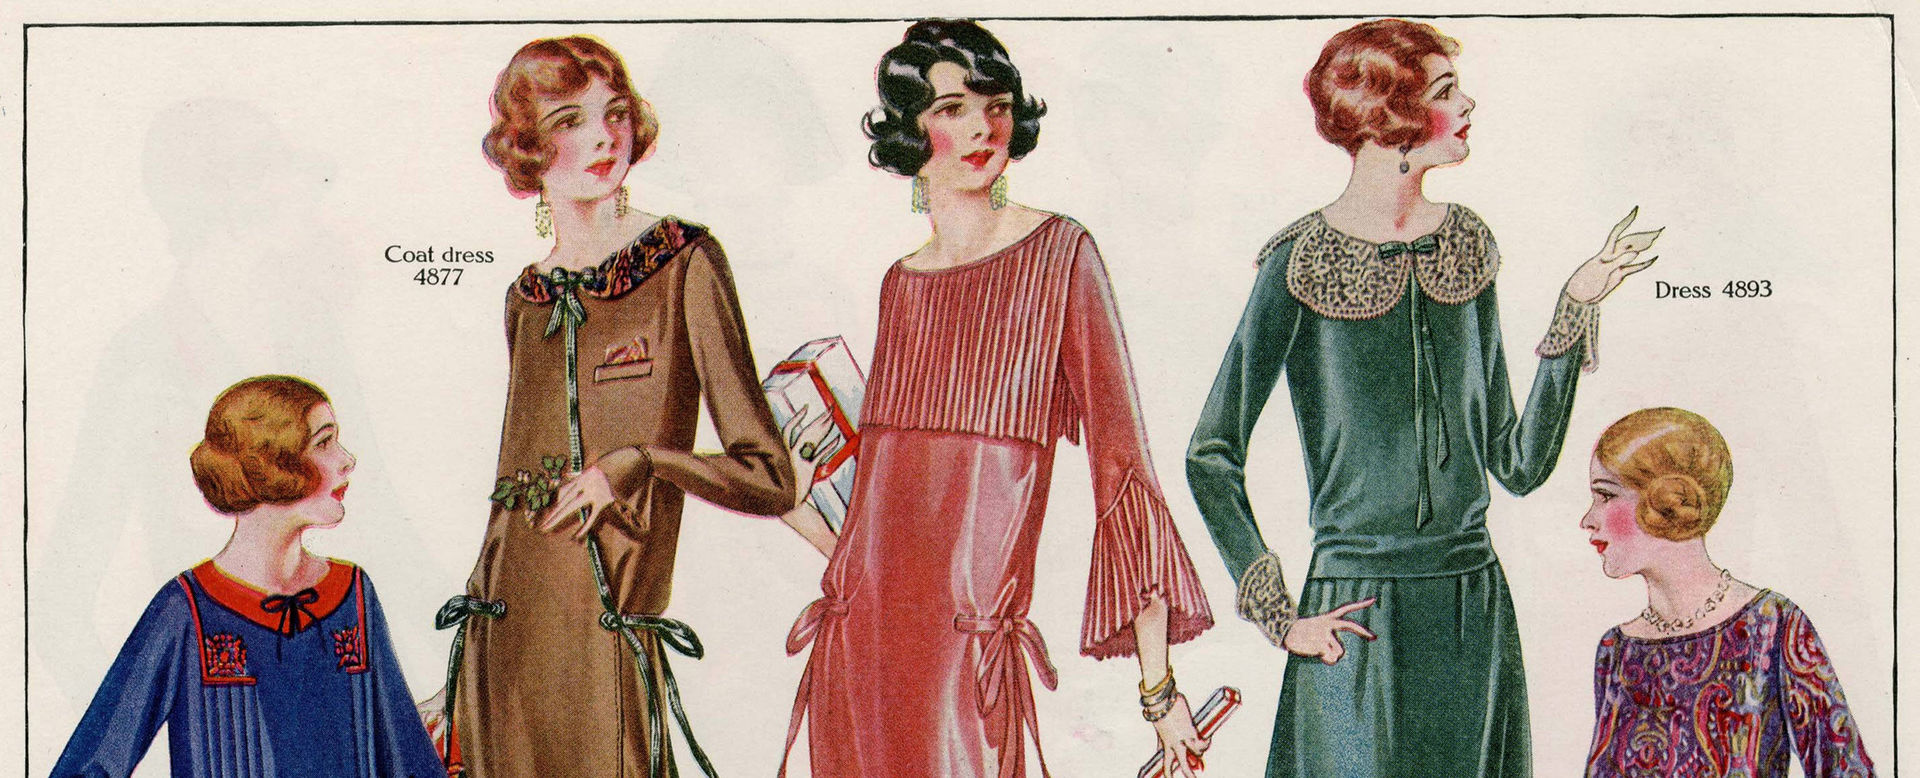 Detail of an illustration depicting women modeling colorful period evening dresses, circa 1923